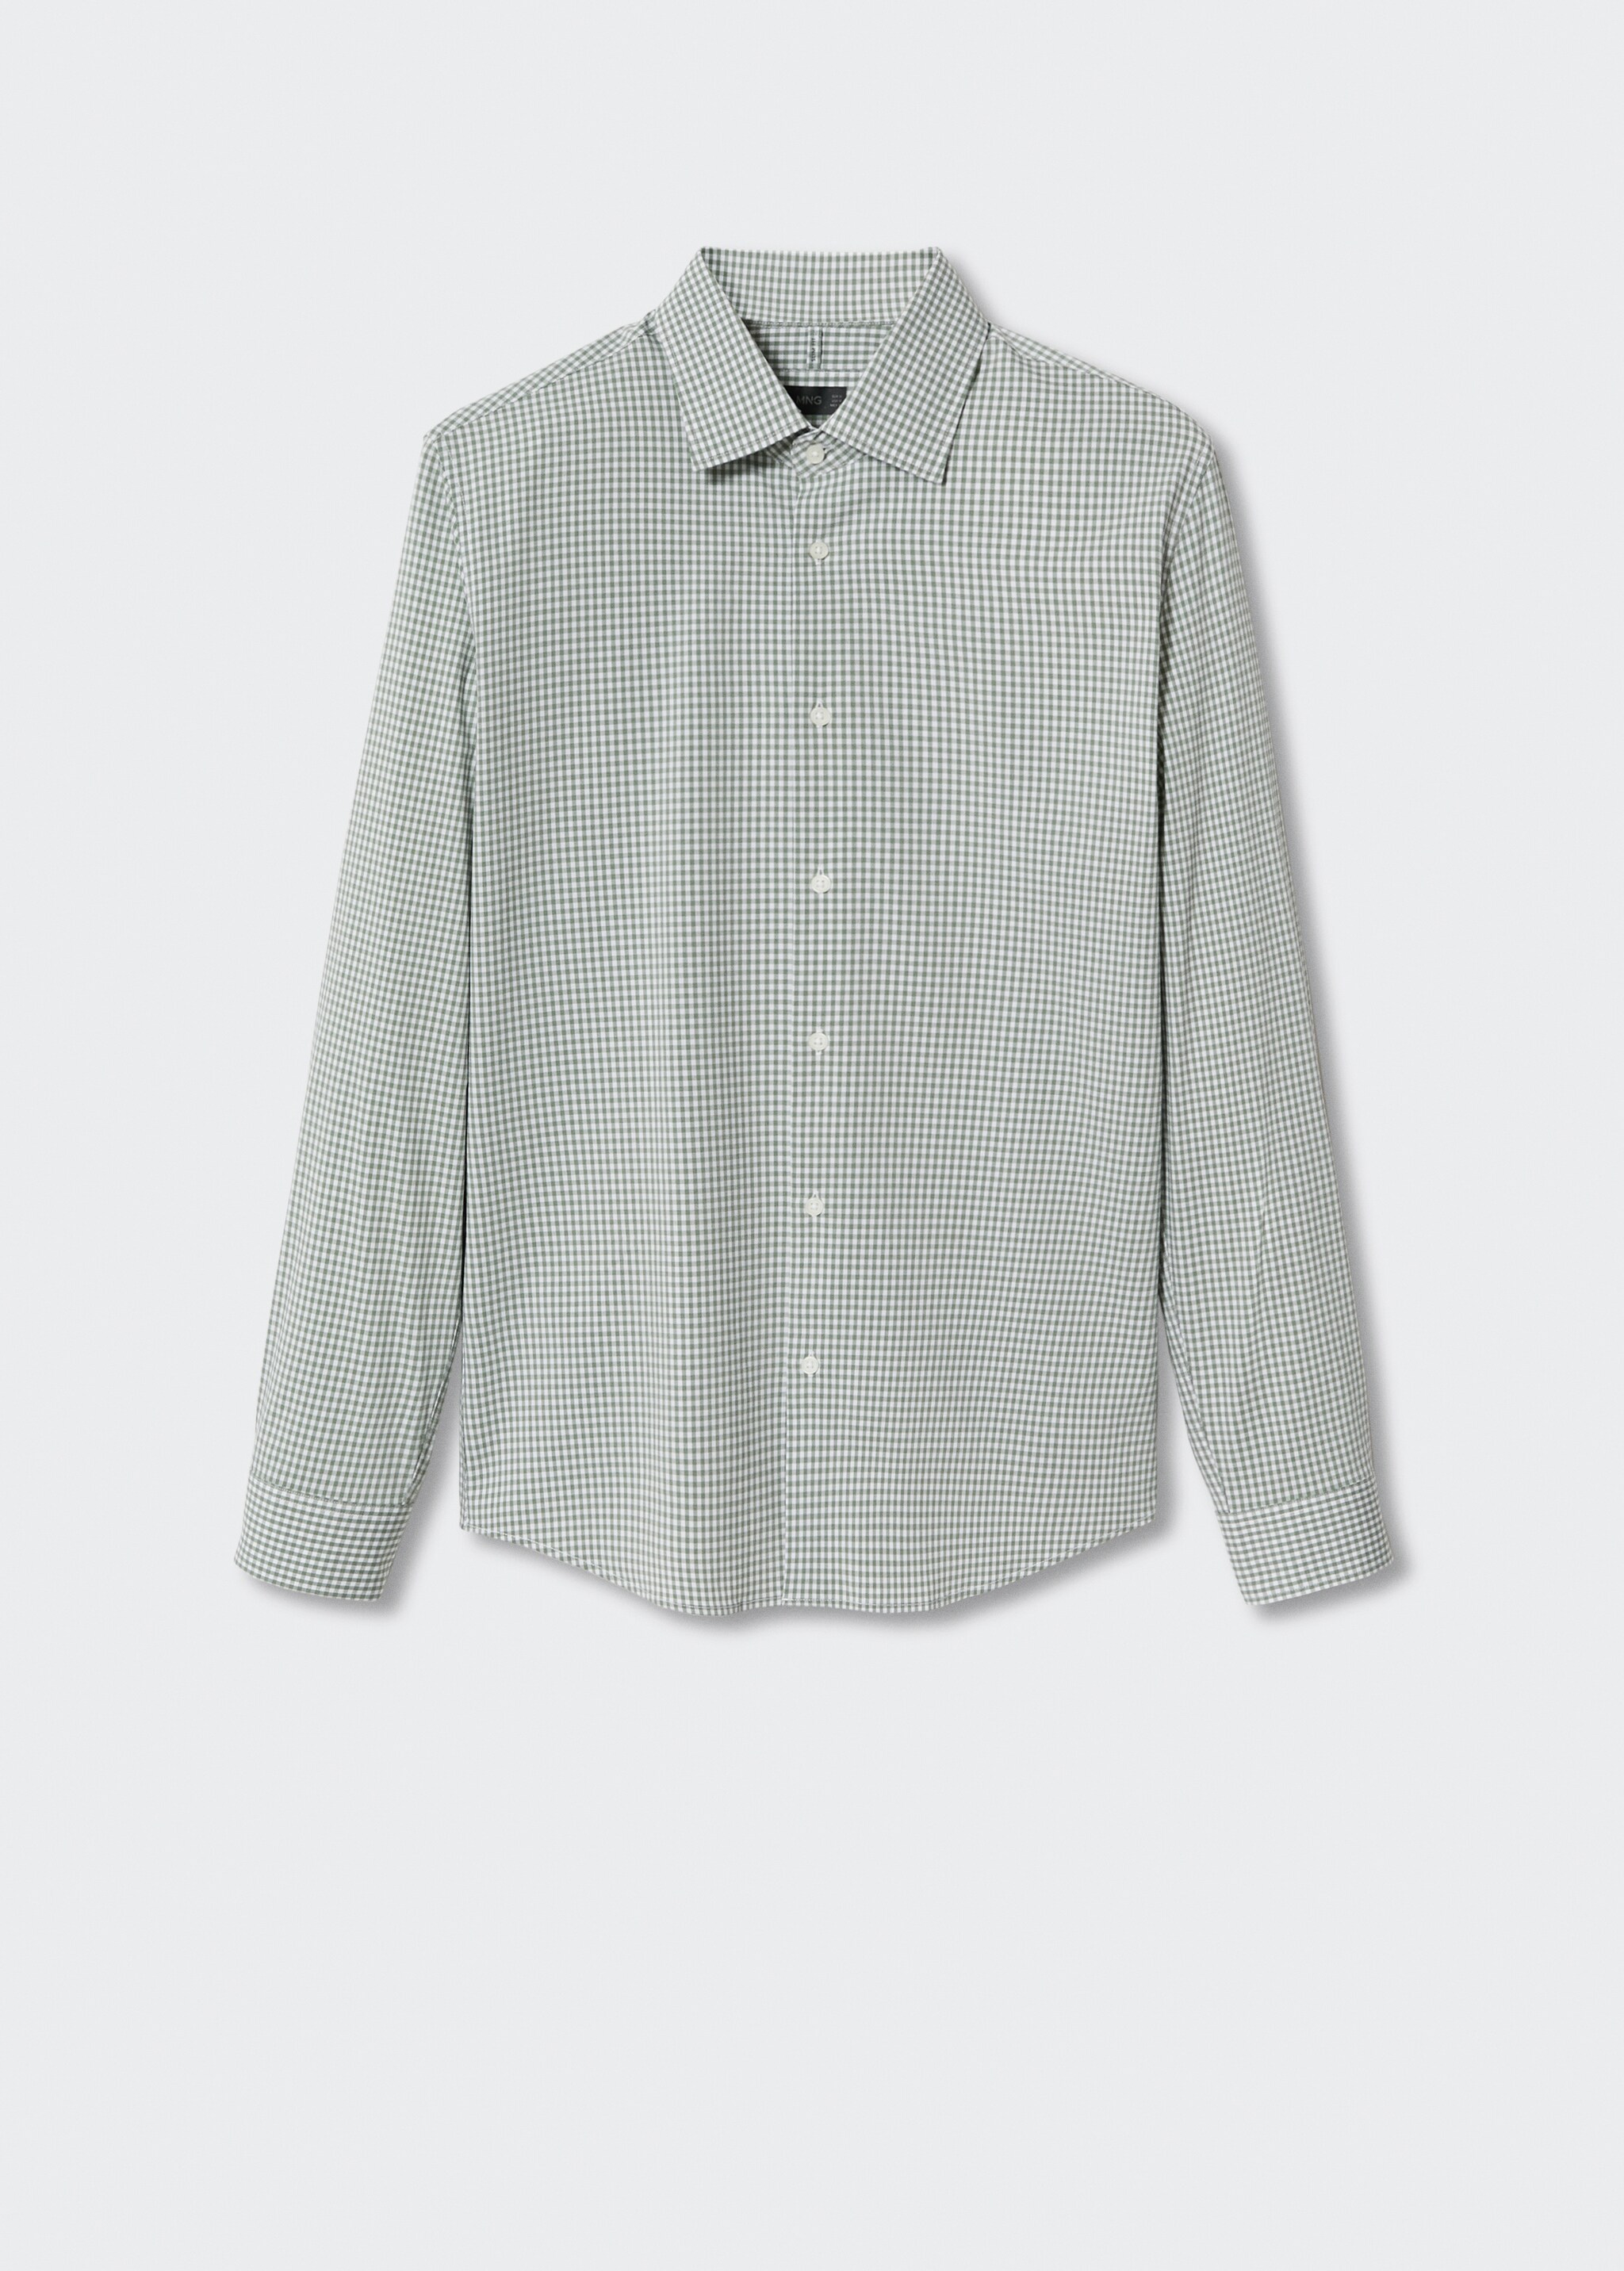 Slim fit gingham check shirt - Article without model